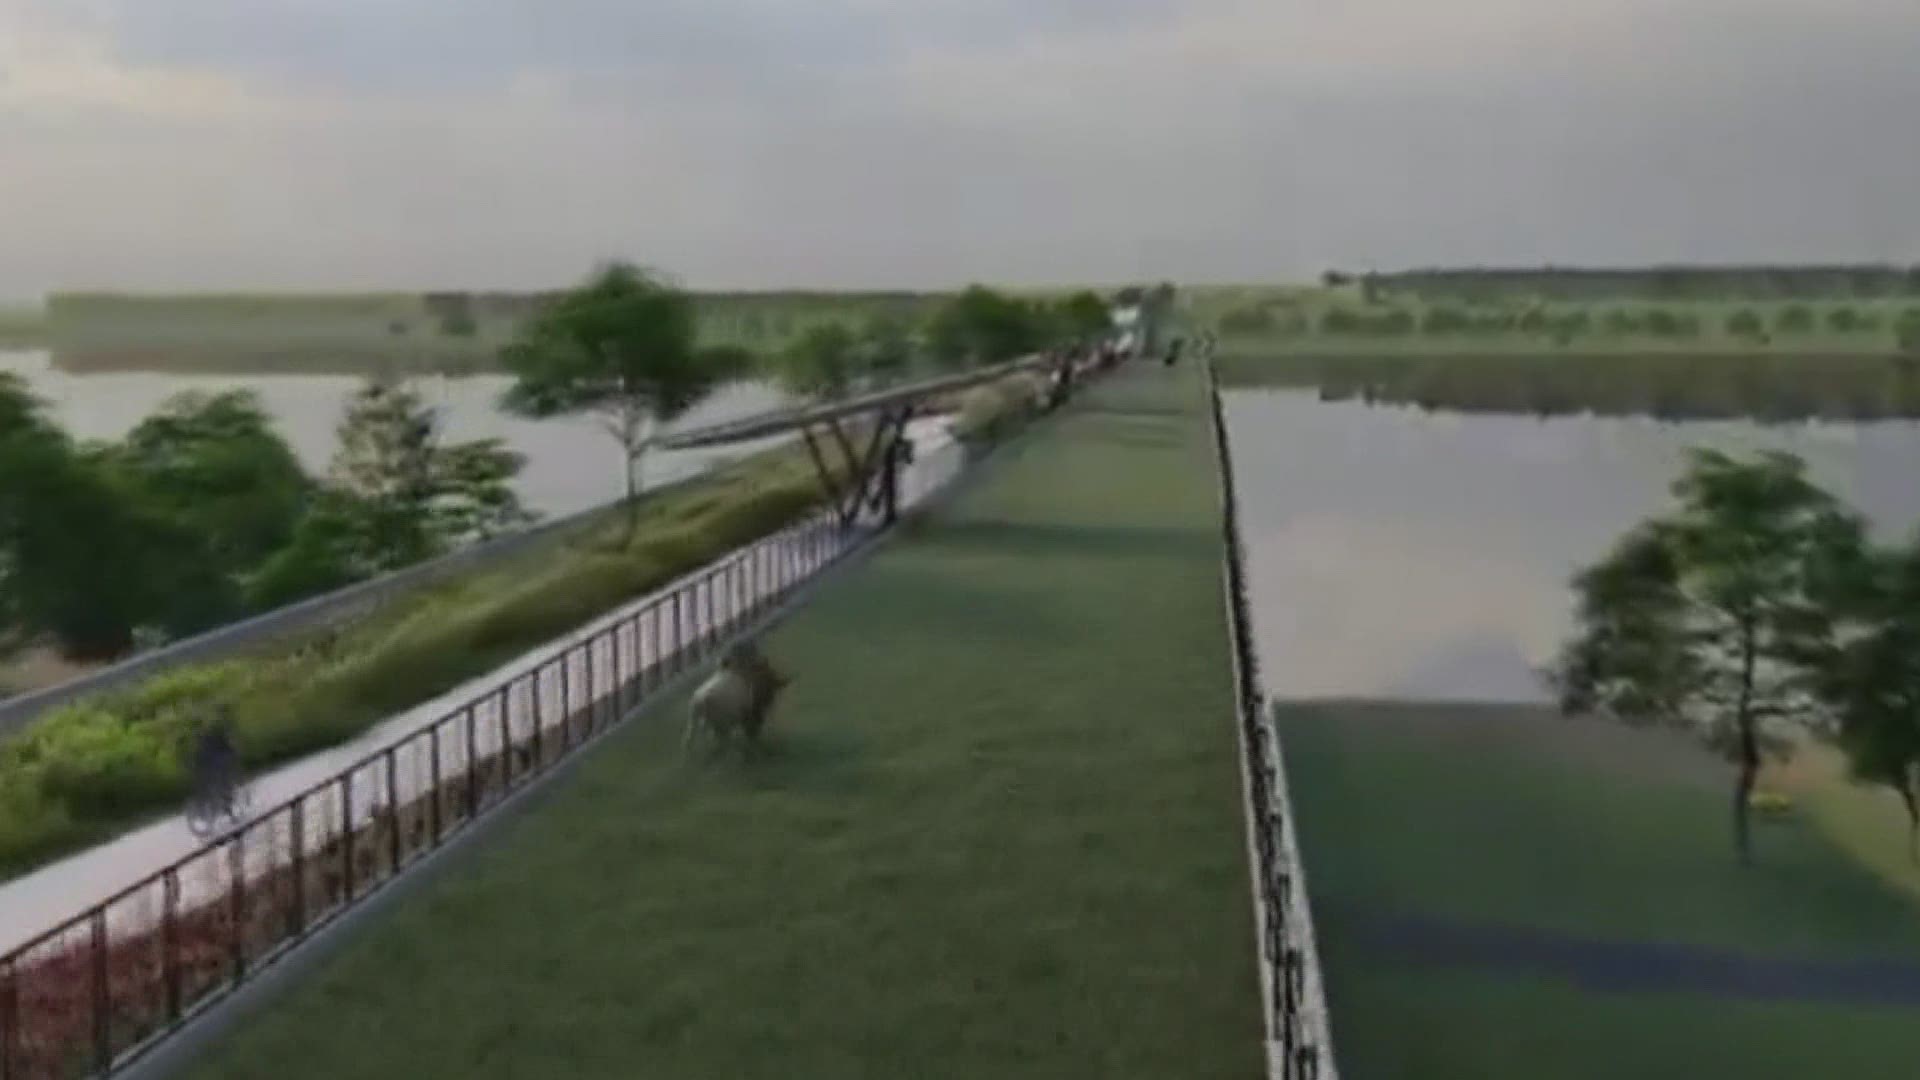 The environmentalist icon and President of Living Lands and Waters revealed a project to repurpose the I-80 bridge following IDOT talks of building a new bridge.